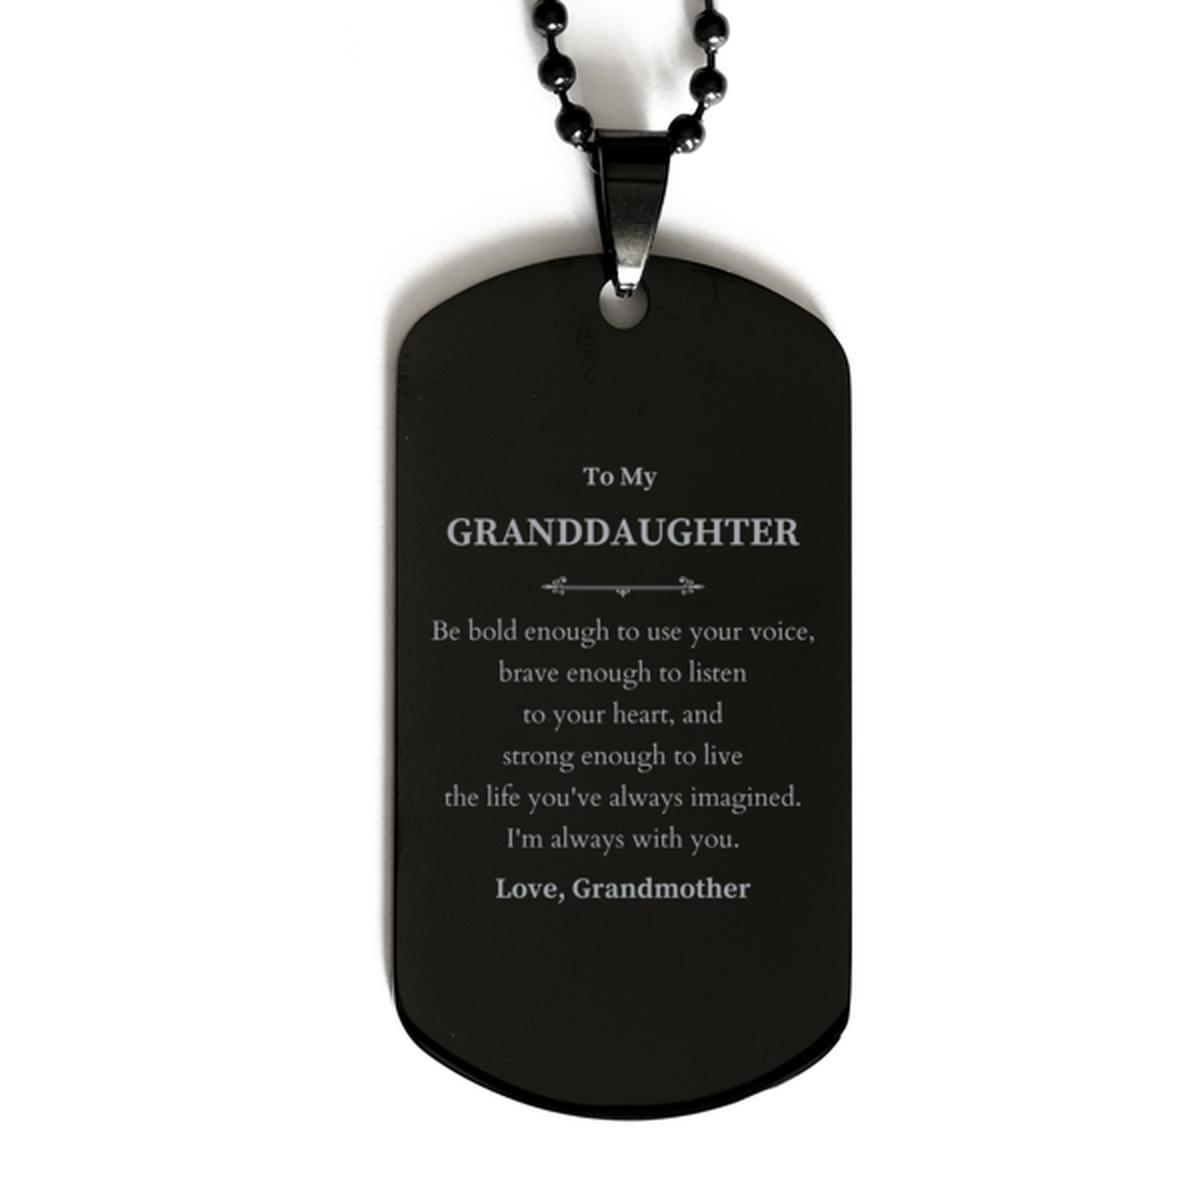 Keepsake Granddaughter Black Dog Tag Gift Idea Graduation Christmas Birthday Granddaughter from Grandmother, Granddaughter Be bold enough to use your voice, brave enough to listen to your heart. Love, Grandmother